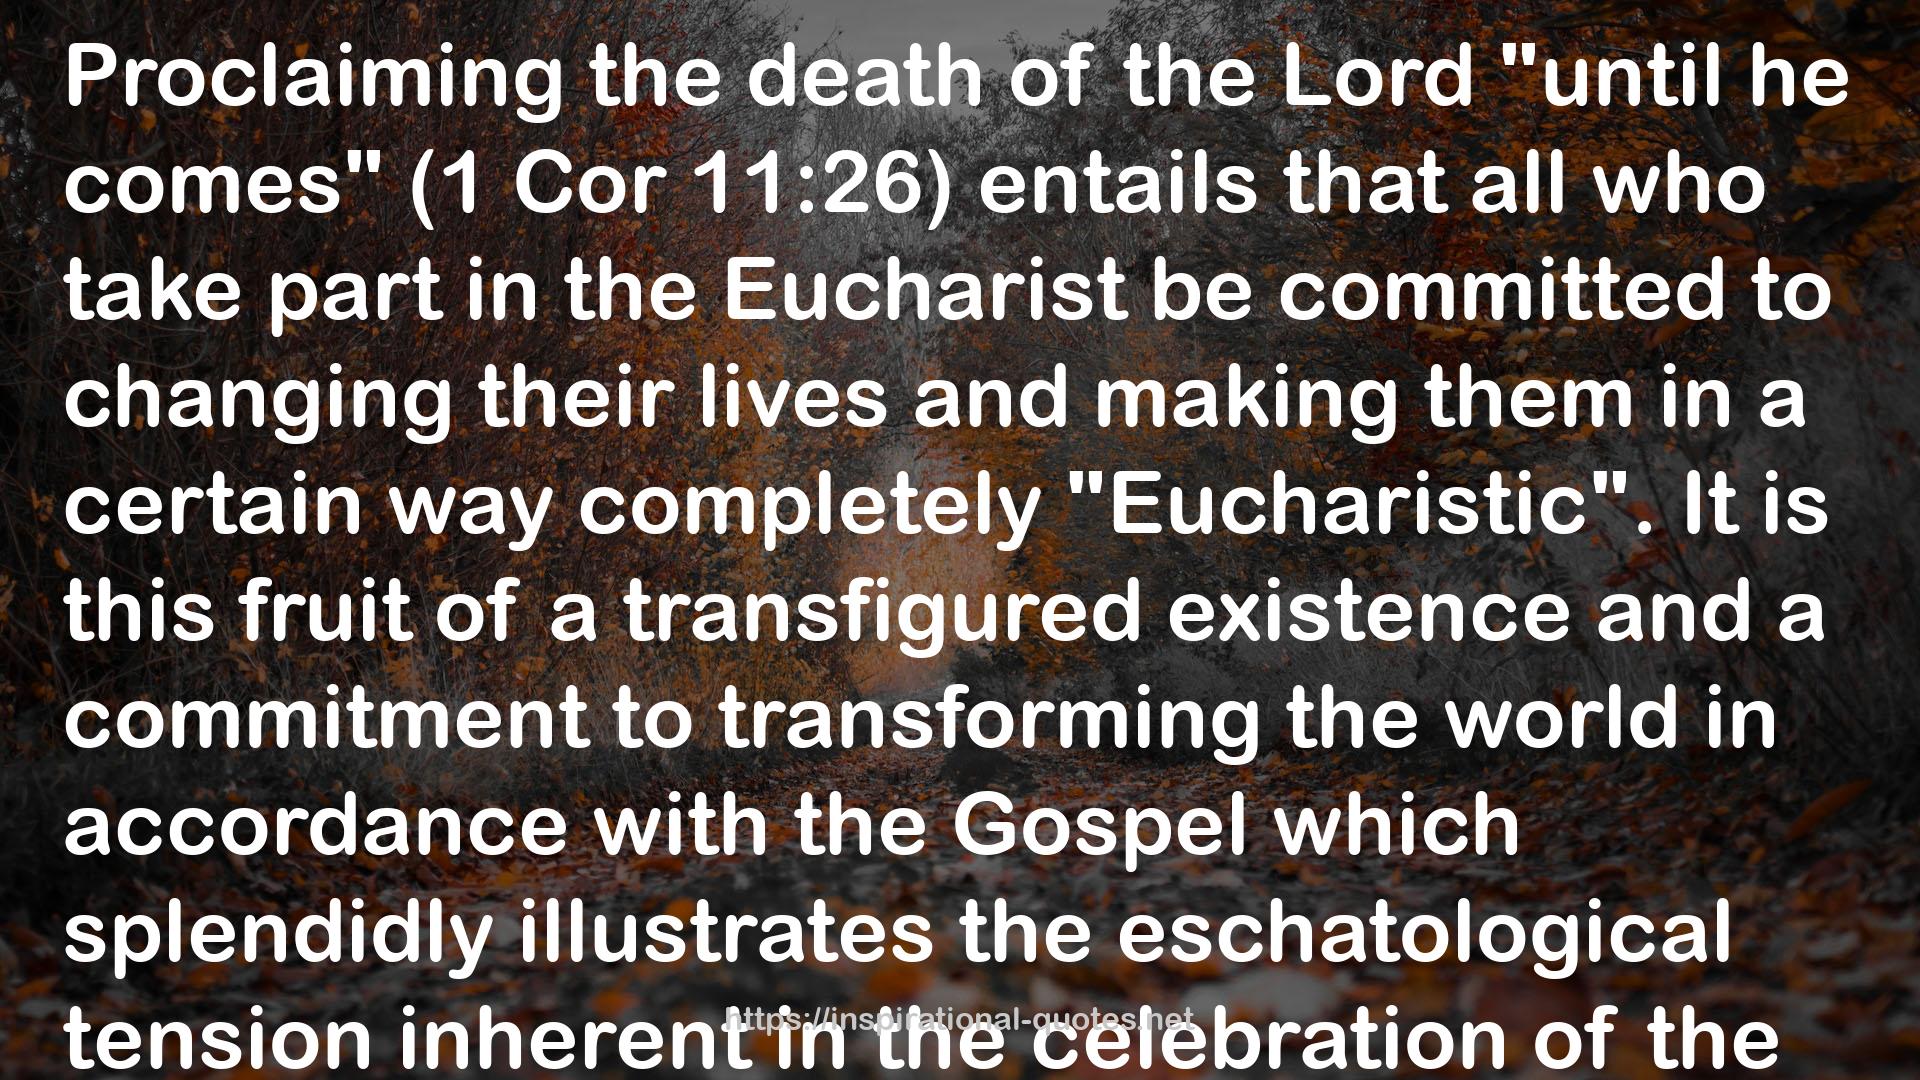 Ecclesia de Eucharistia: On the Eucharist in Its Relationship to the Church QUOTES